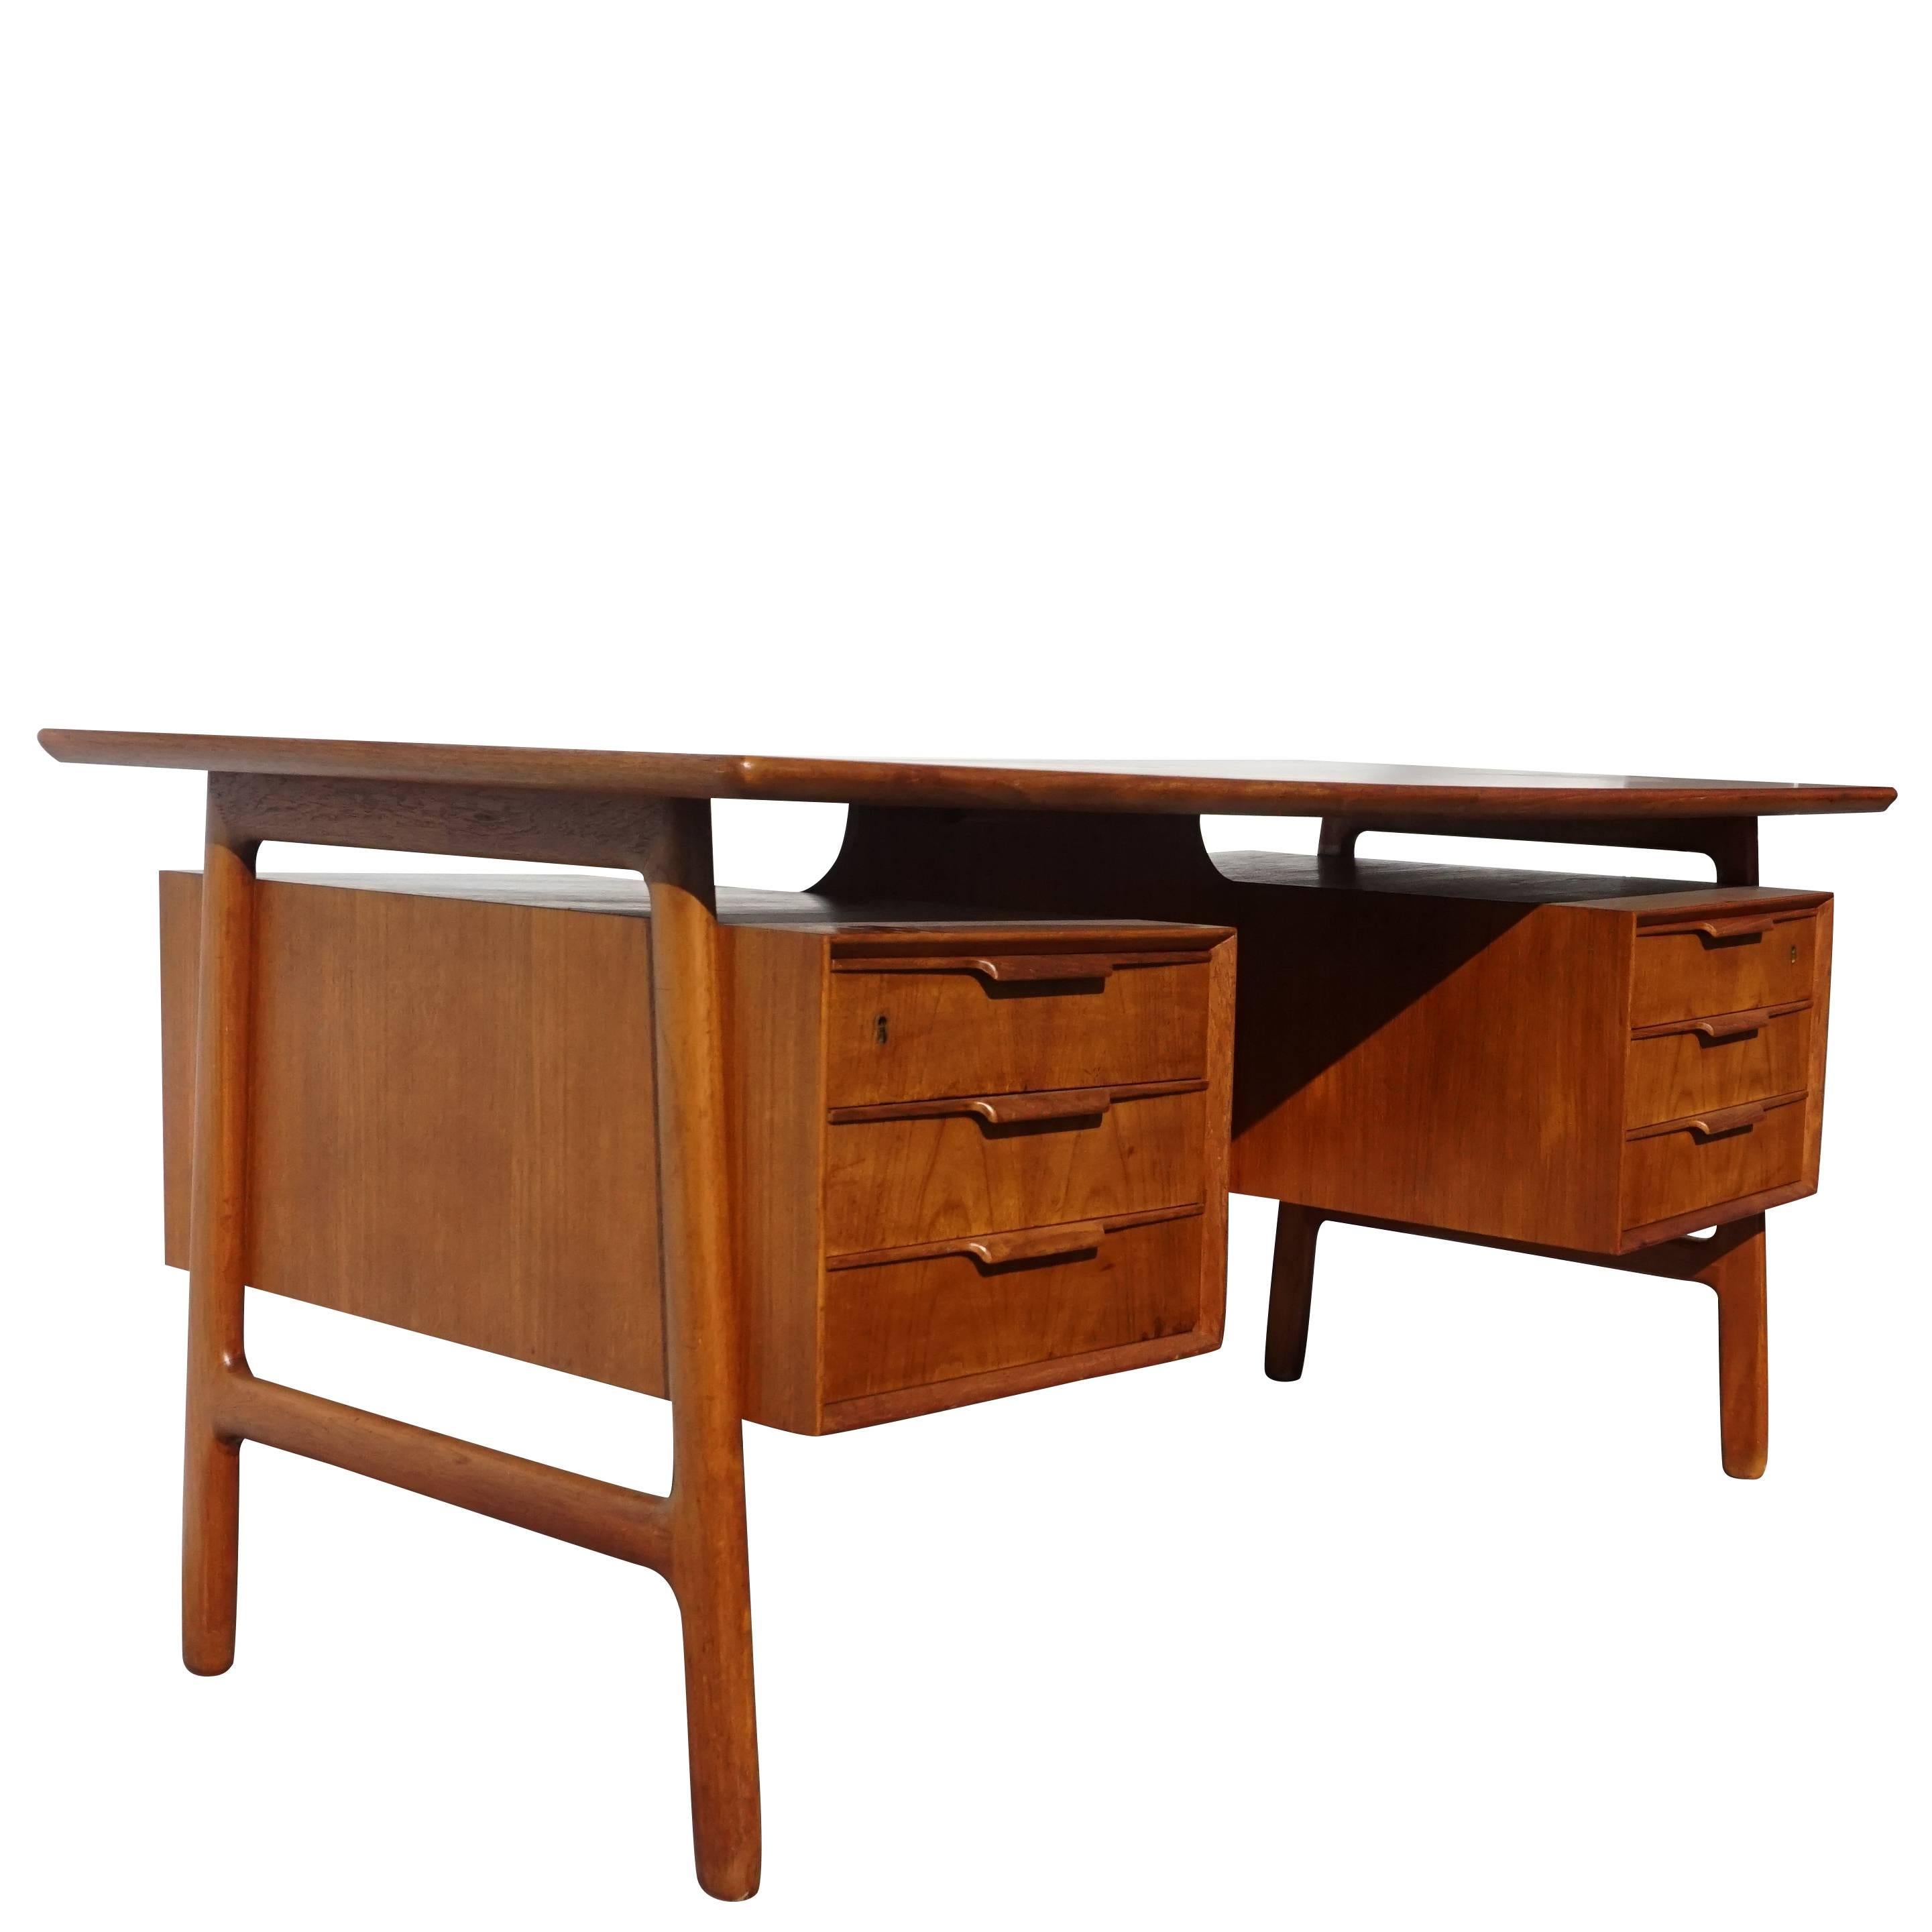 A vintage Mid-Century Modern Danish writing table designed by Bjarne & Gunni Omann, in good condition. The Scandinavian desk is made of hand carved cherry and beechwood, composed with six drawers, standing on four slightly curved wooden legs. Wear